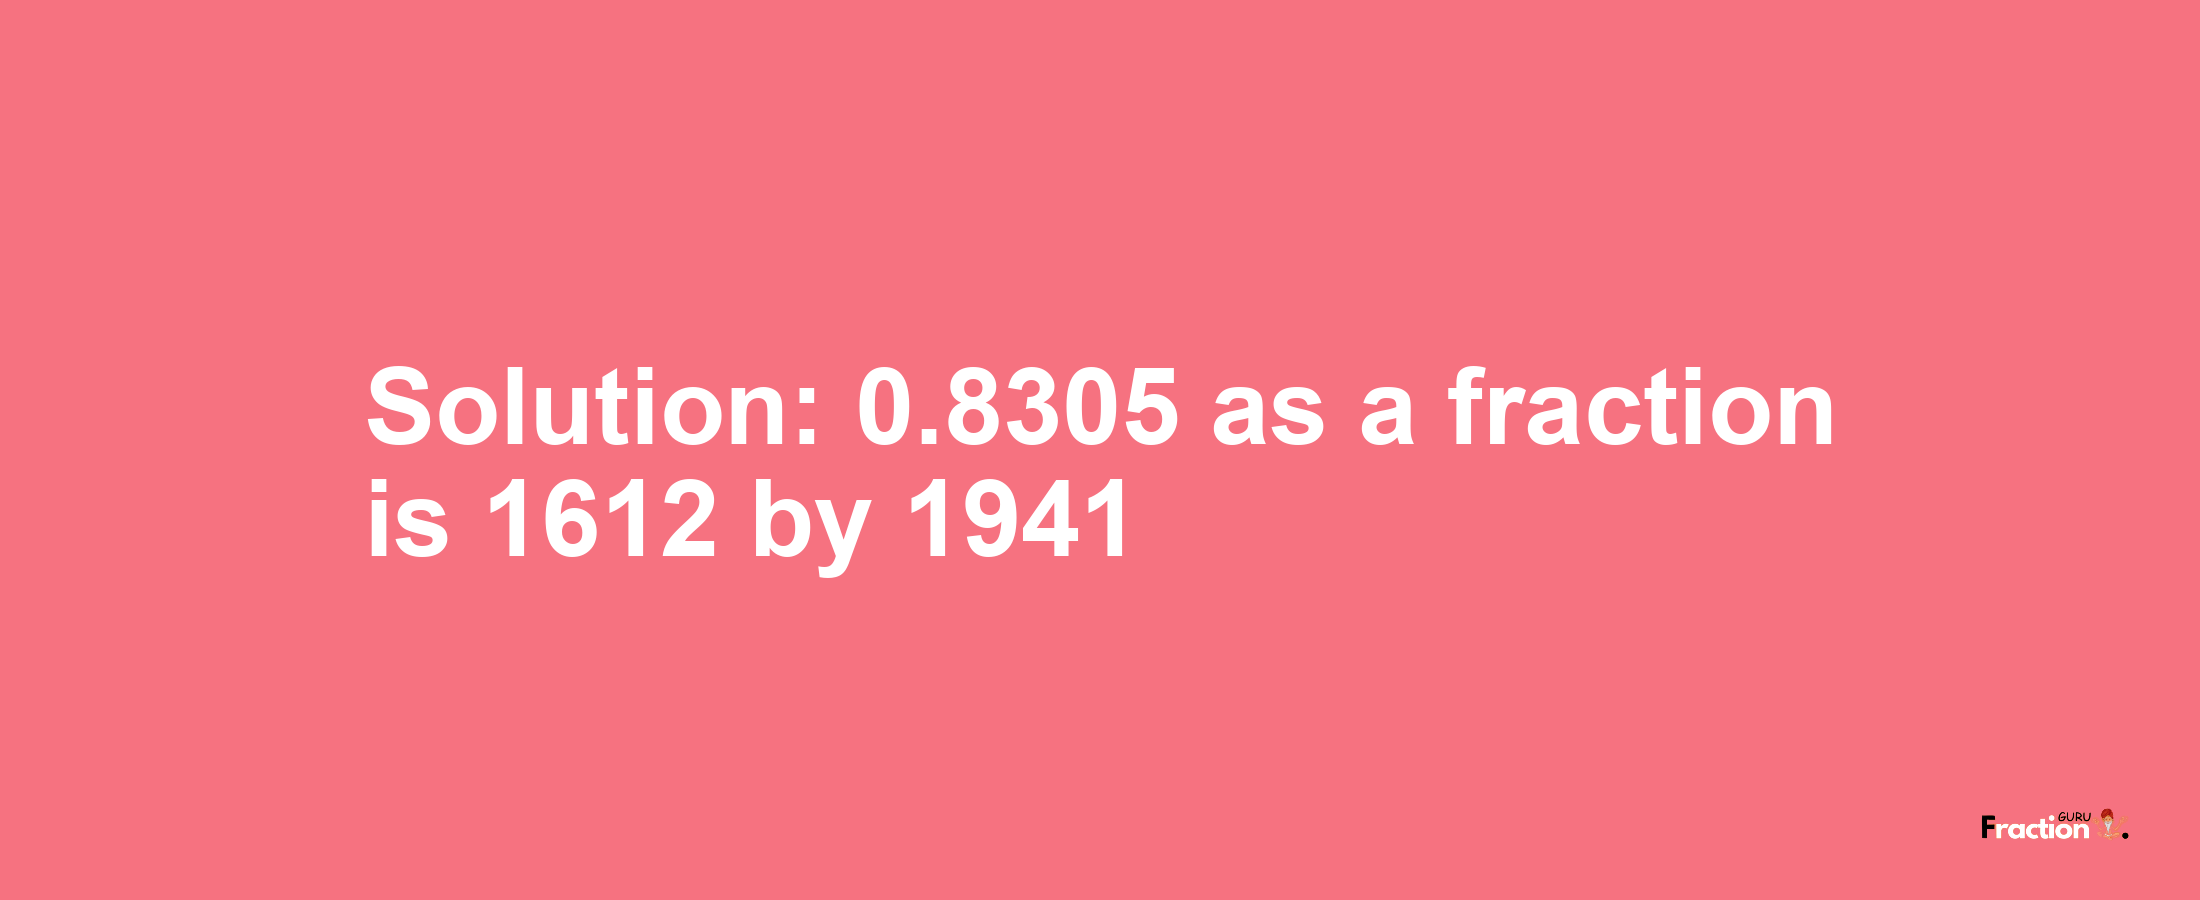 Solution:0.8305 as a fraction is 1612/1941